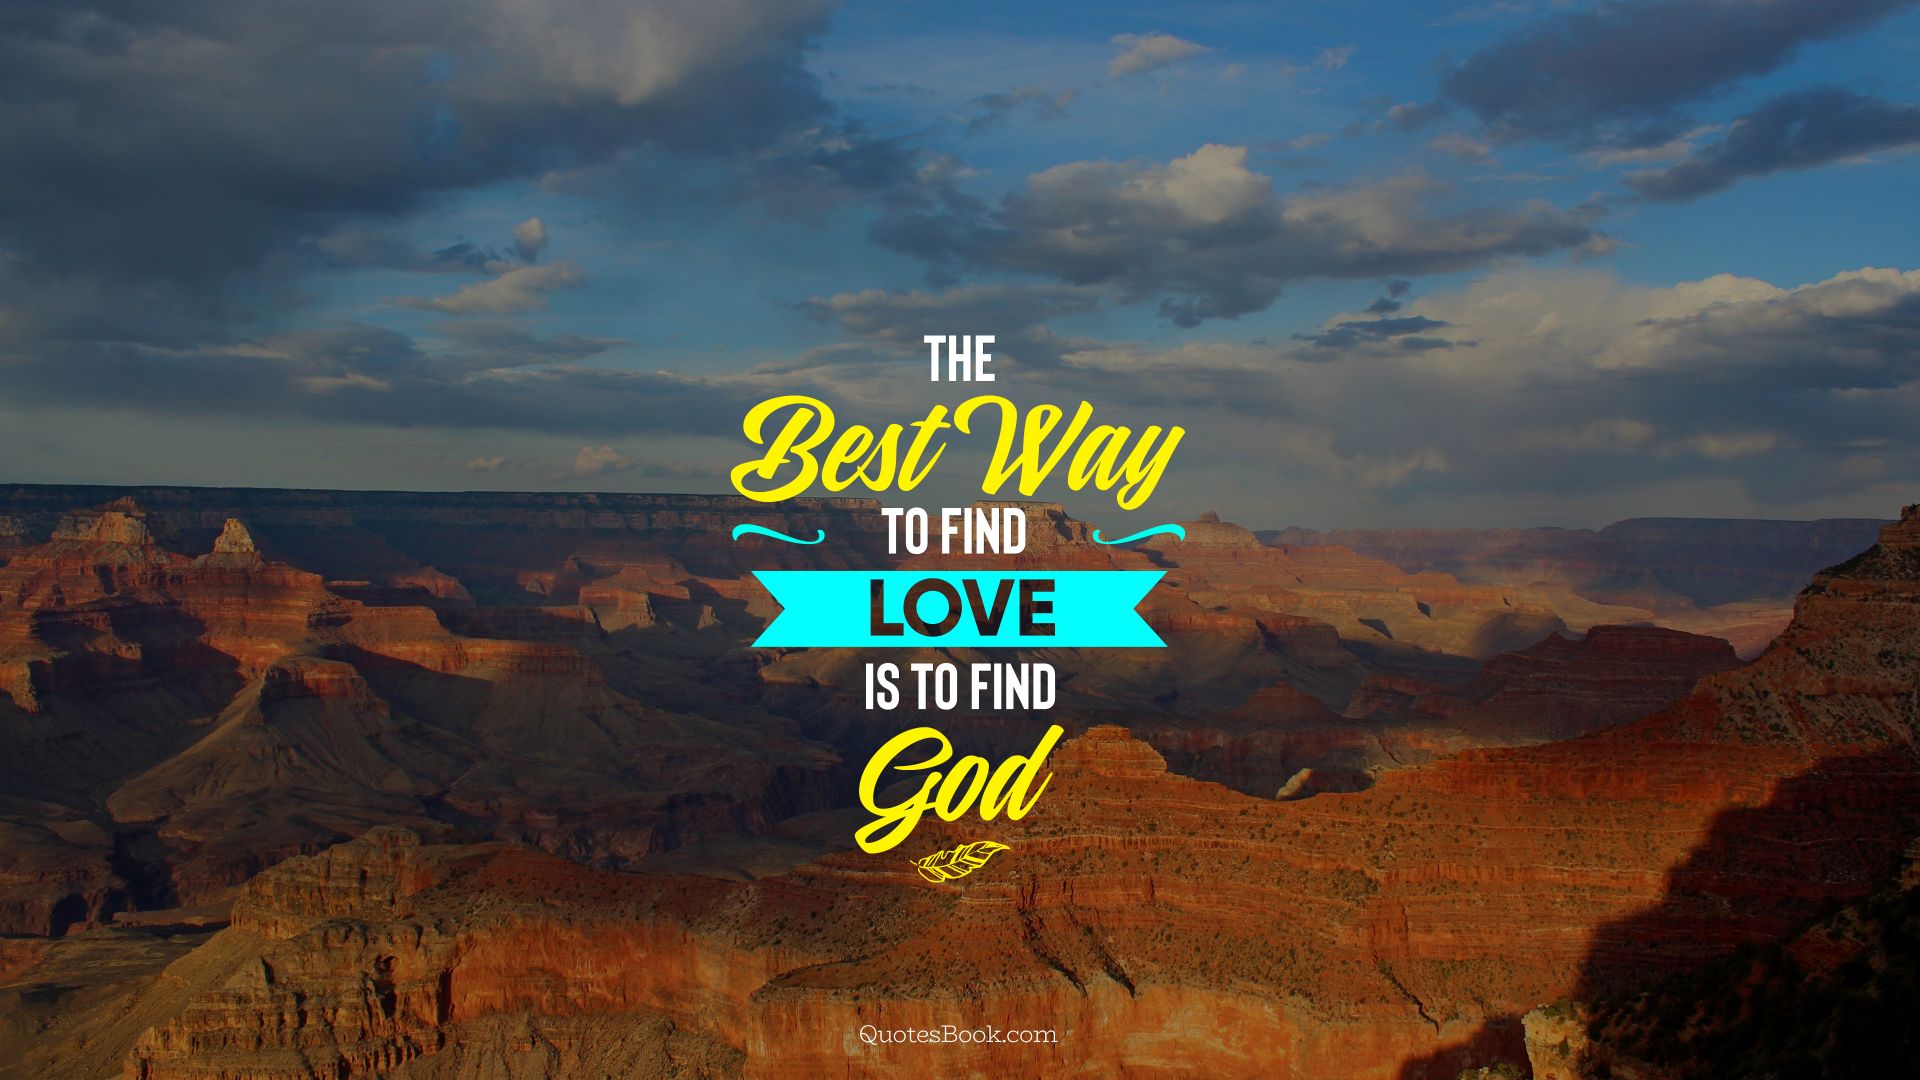 The best way to find love is to find God